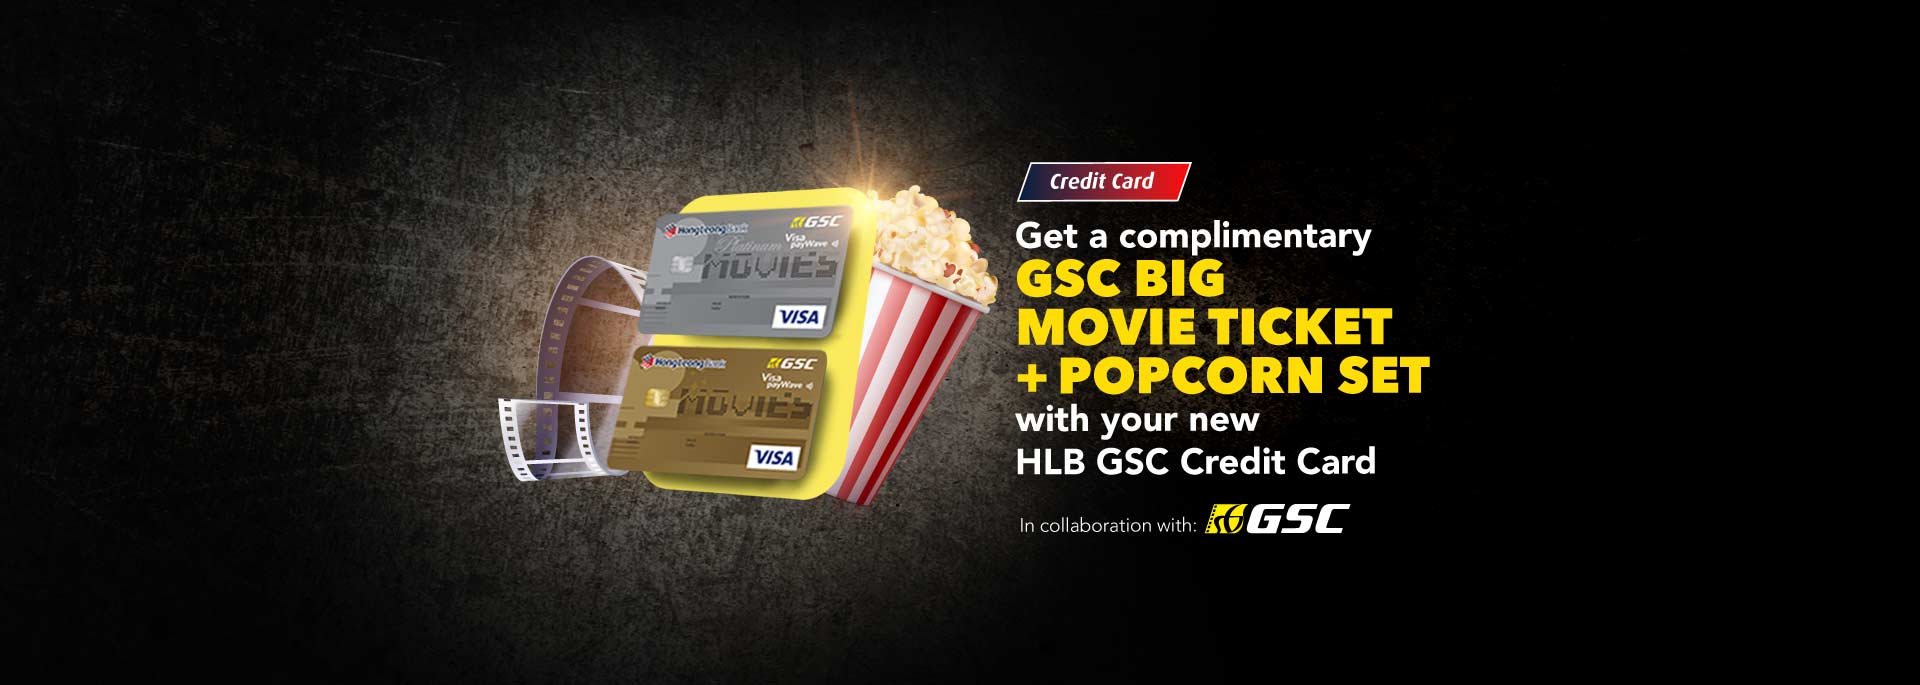 Get a complimentary GSC Big Movie Ticket + popcorn set 